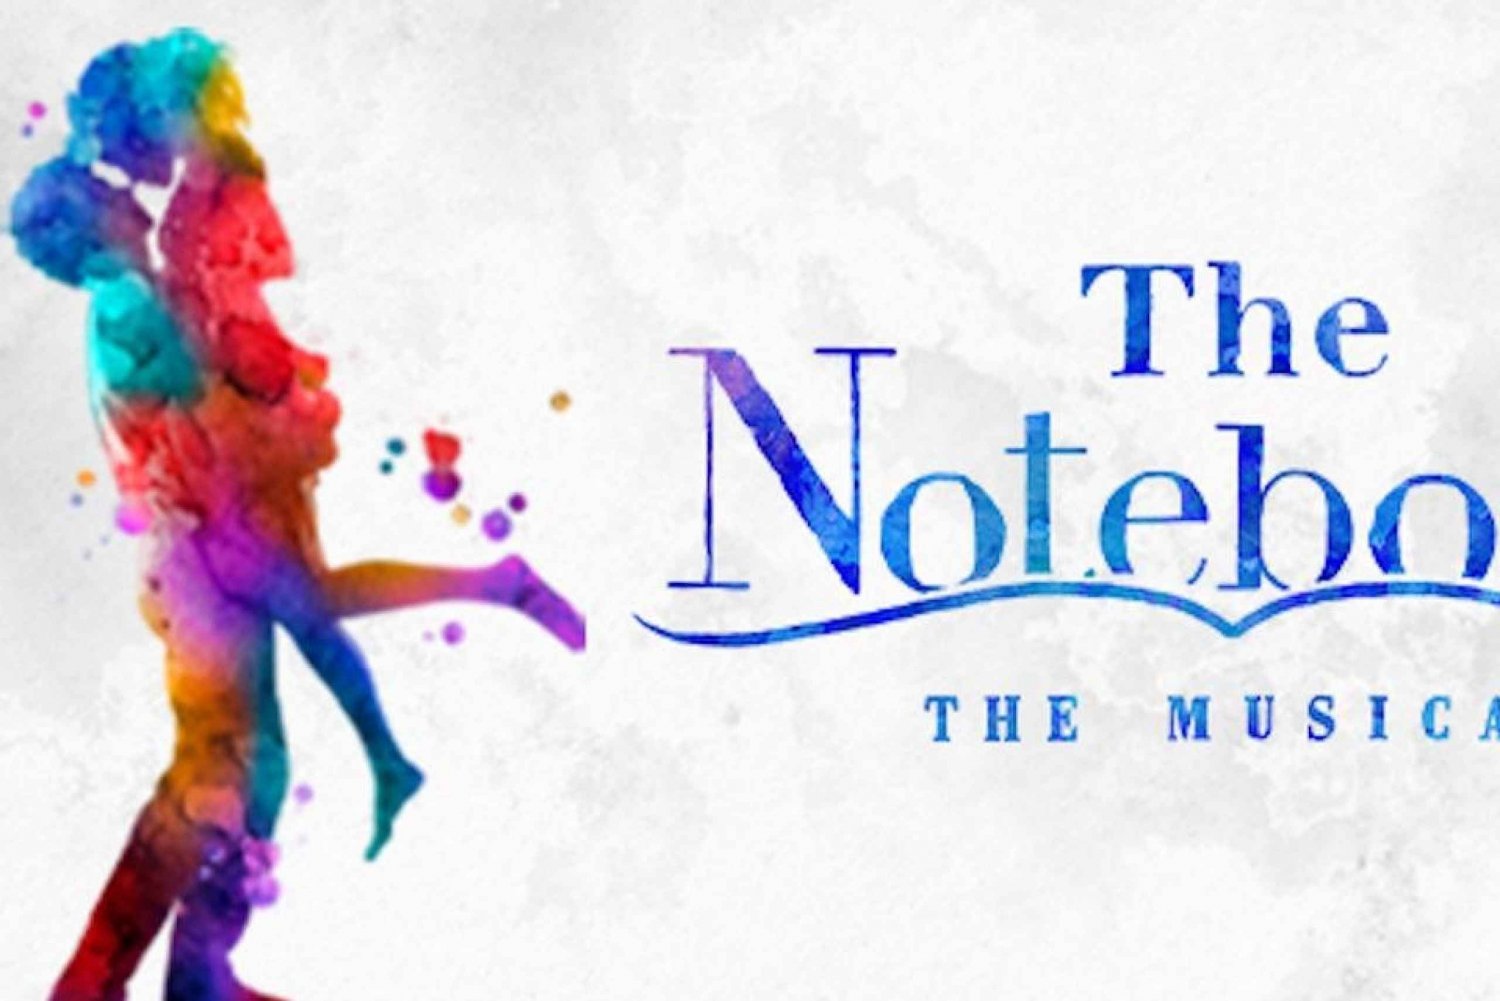 NYC: The Notebook on Broadway